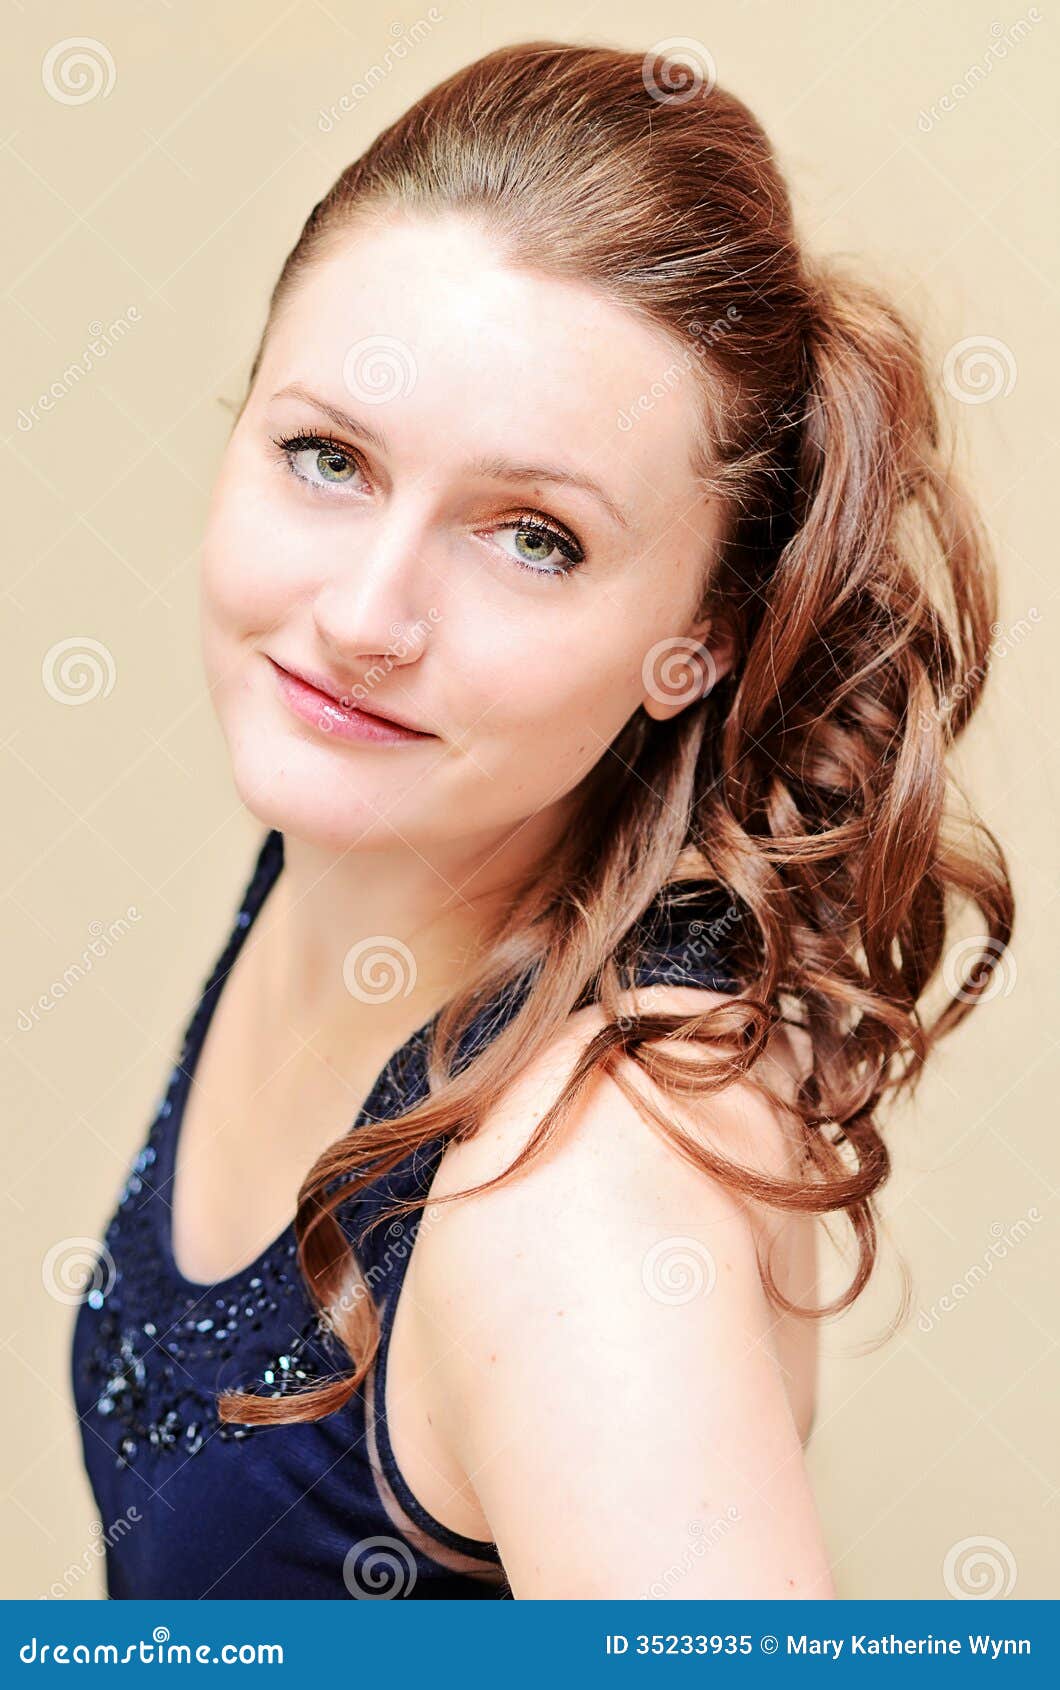 Woman With Formal Hairstyle Stock Image - Image: 35233935